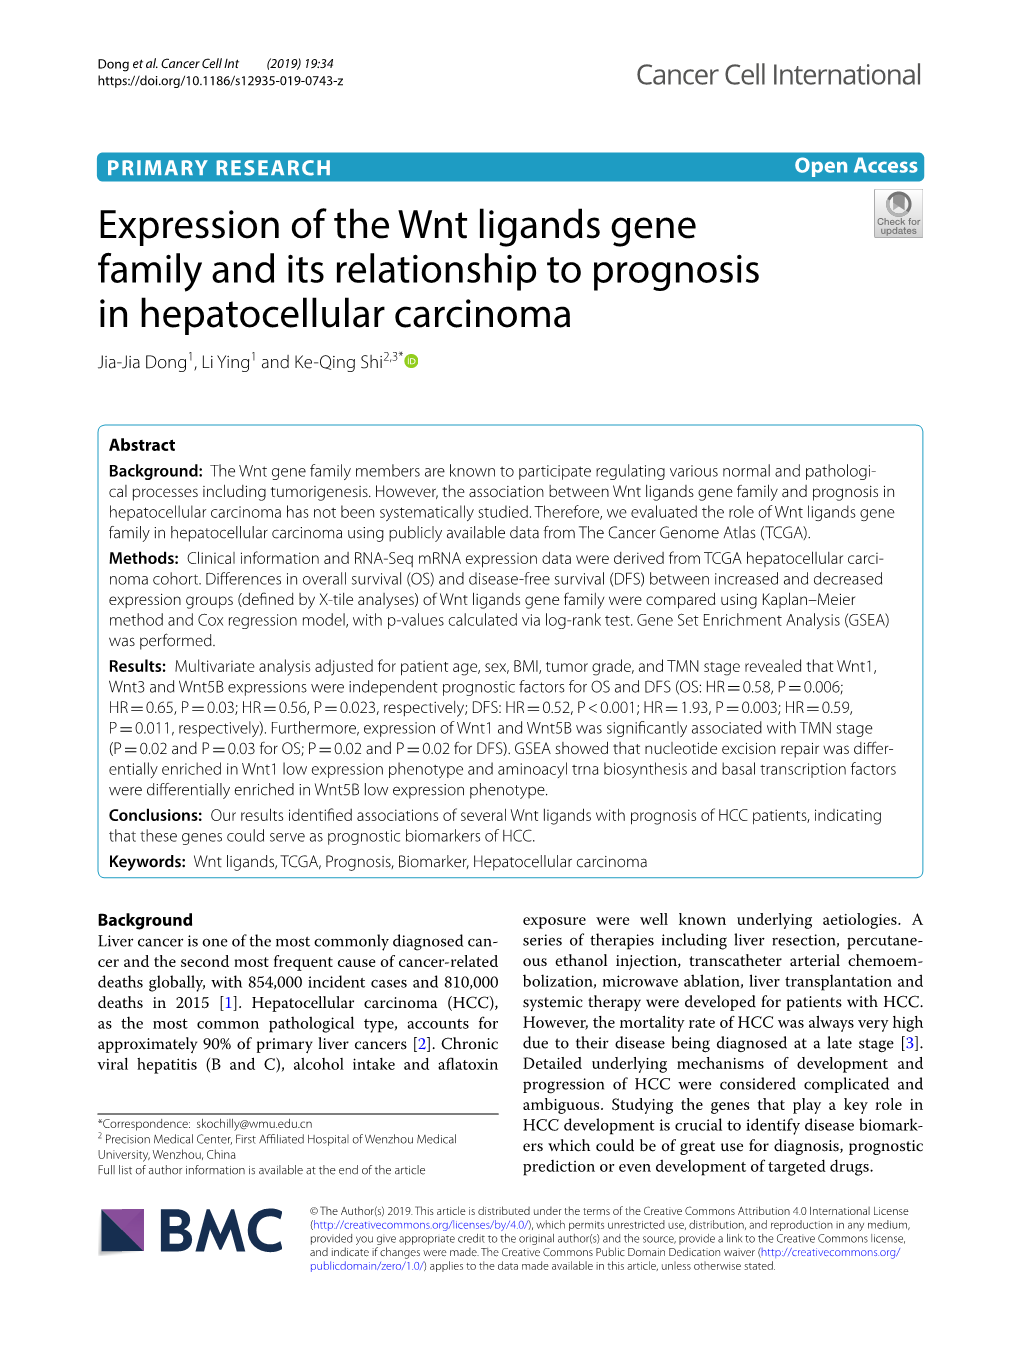 Expression of the Wnt Ligands Gene Family and Its Relationship to Prognosis in Hepatocellular Carcinoma Jia‑Jia Dong1, Li Ying1 and Ke‑Qing Shi2,3*